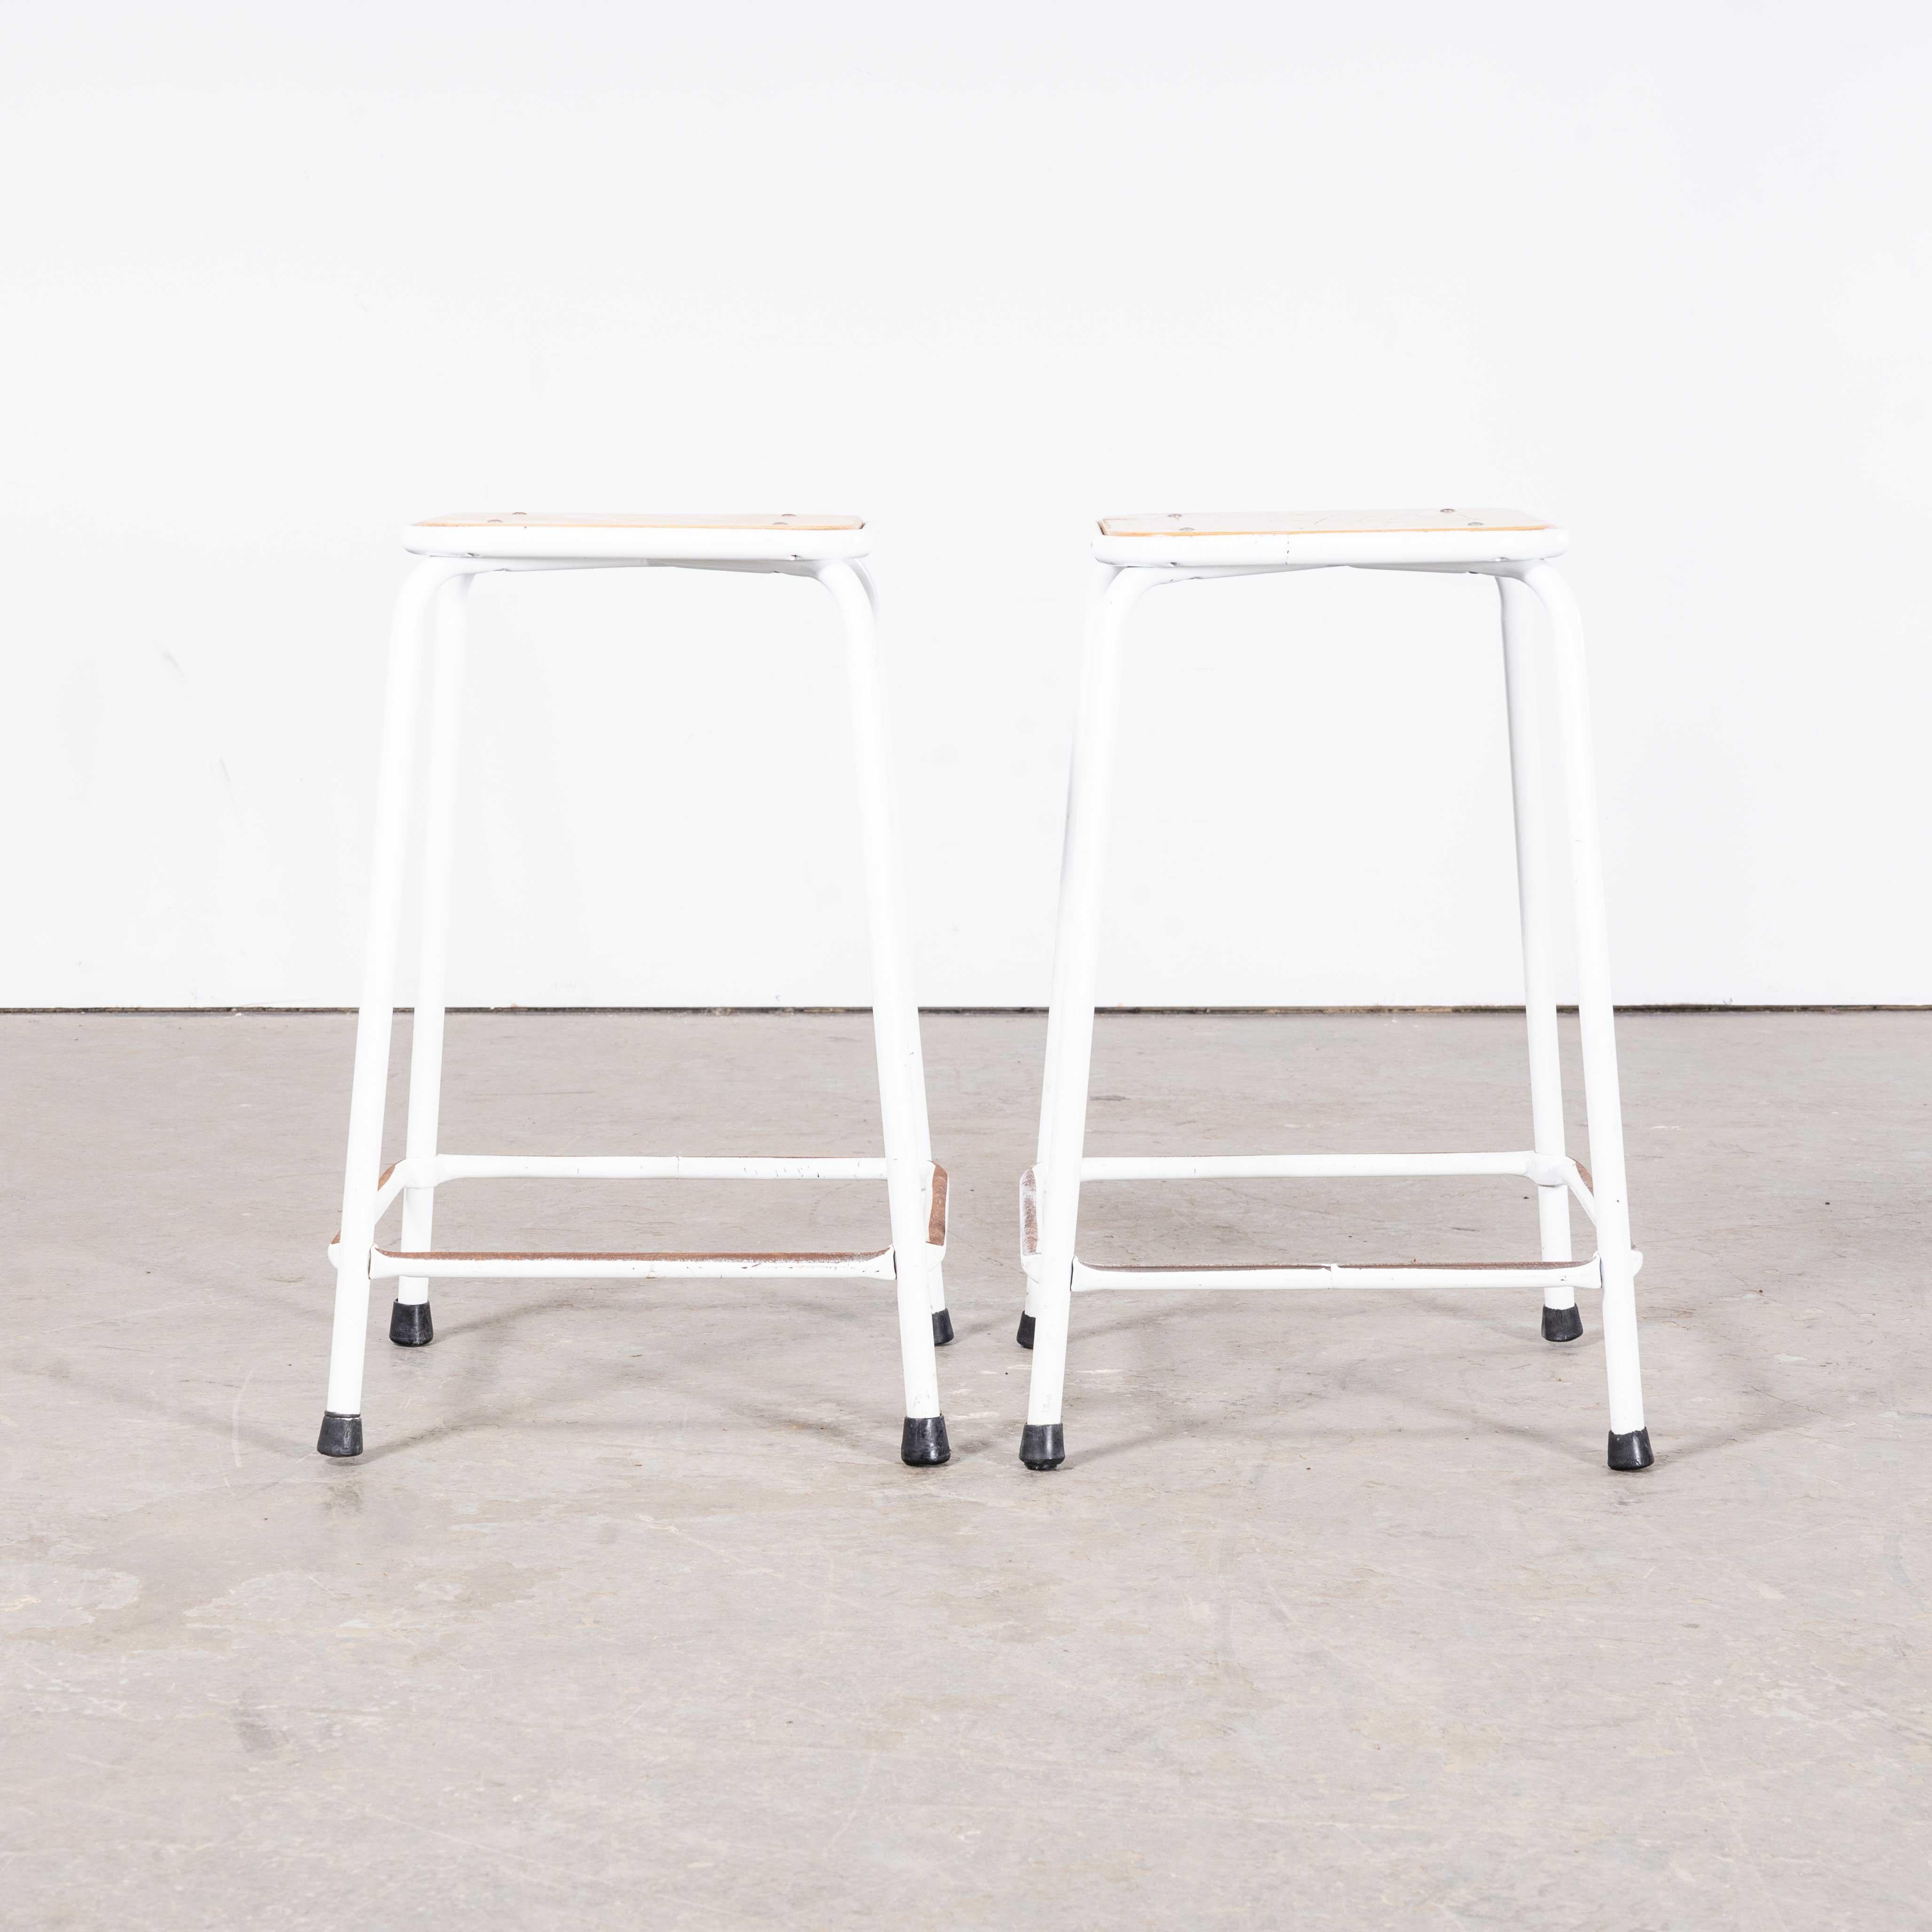 1970’s French White Laboratory Stools – Quantity Available
1970’s French White Laboratory Stools – Quantity Available. Good honest lab stools, heavy steel frames with solid heavy birch ply seats. We clean them and check all fixings, they are good to